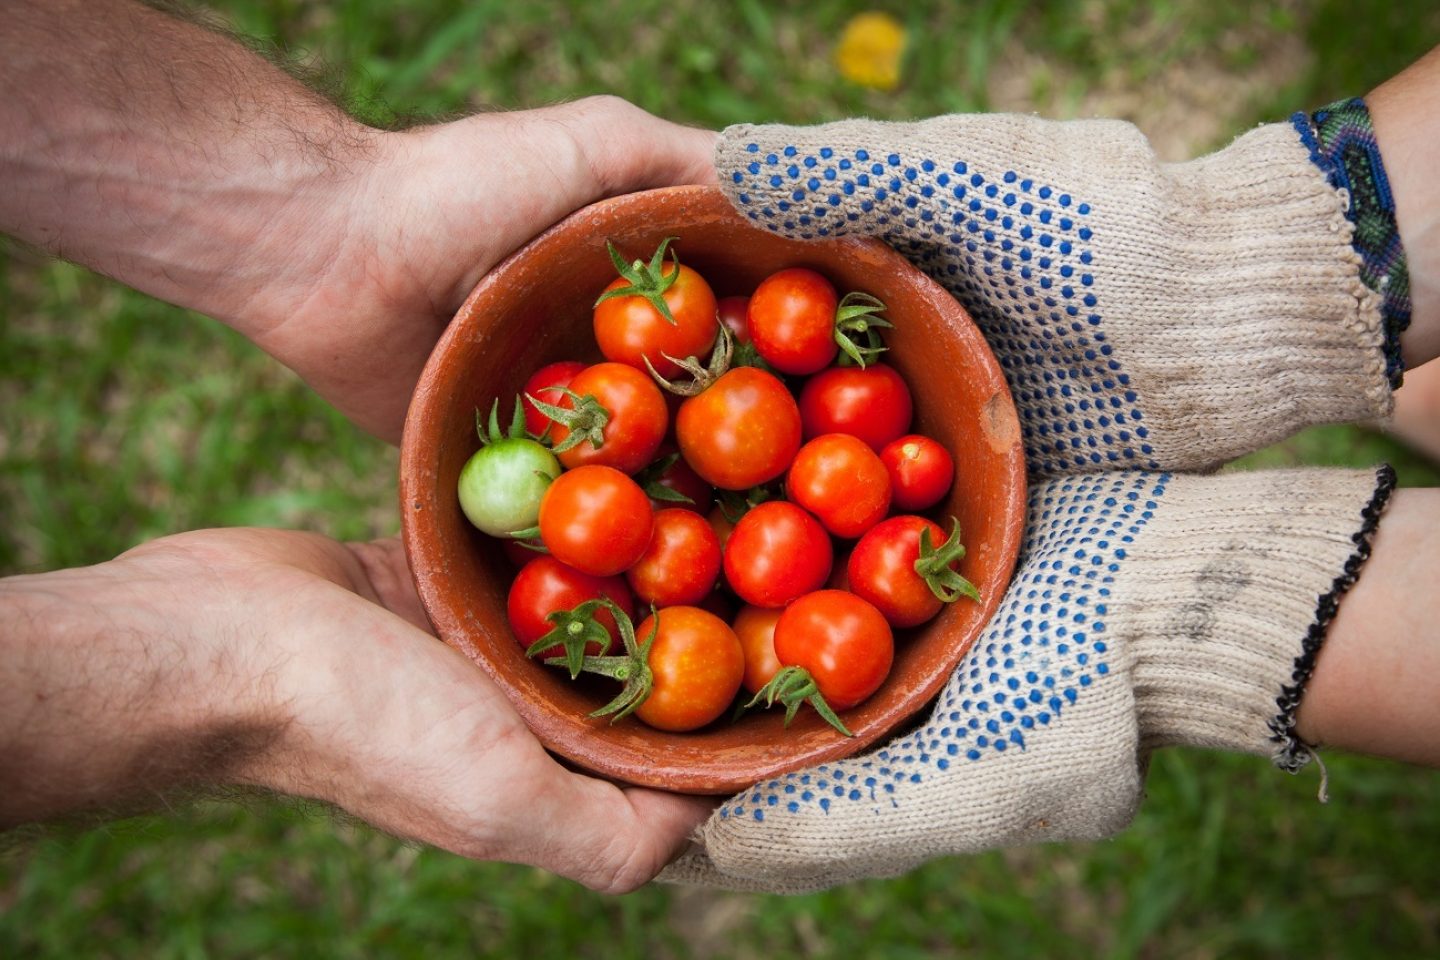 A bowl full of harvested tomatoes